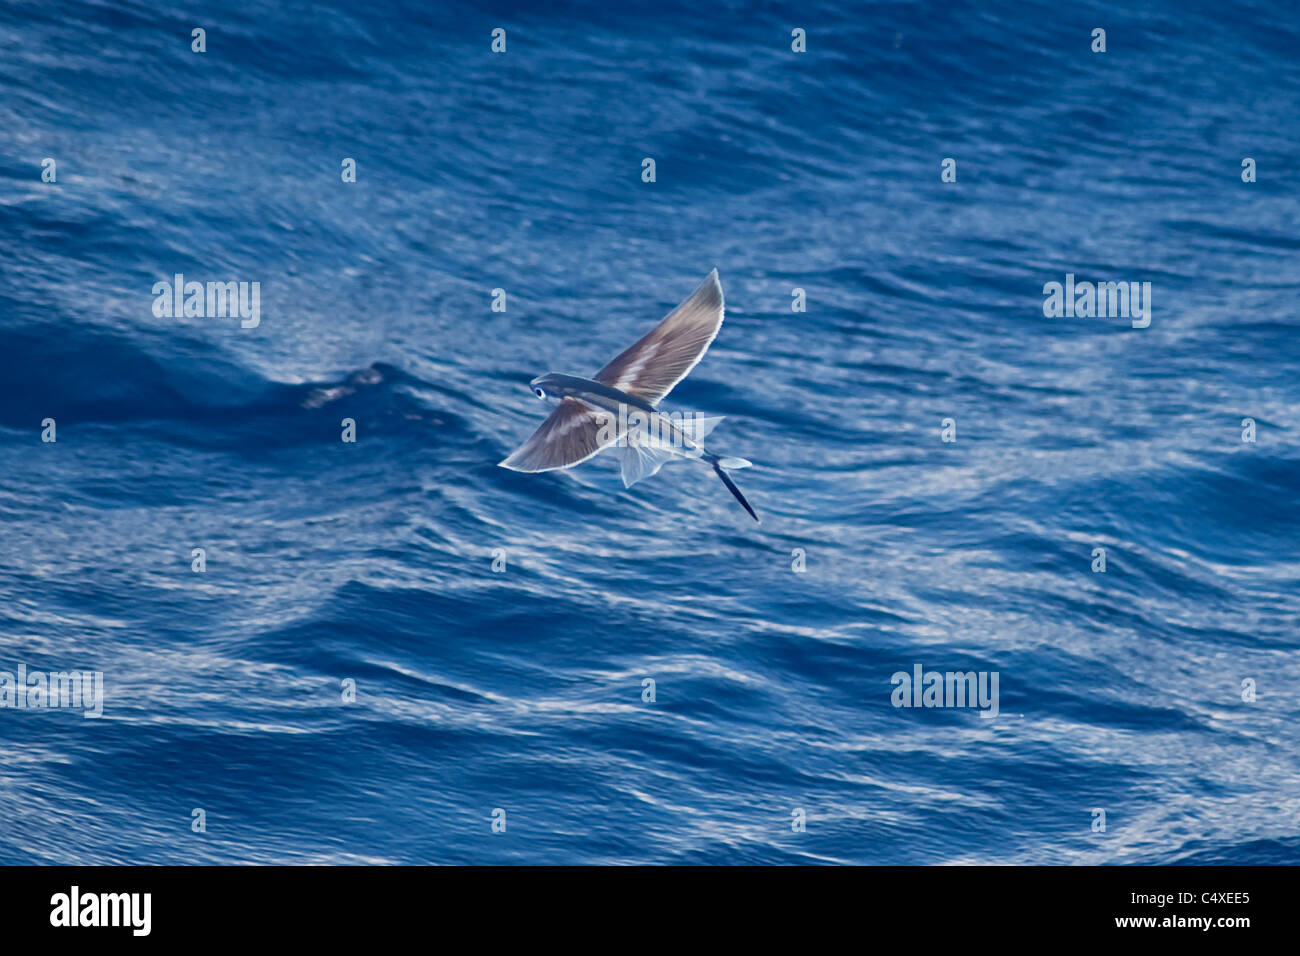 Flying Fish Species (scientific name unknown) rare unusual image, in mid-air. South Atlantic Ocean. Stock Photo